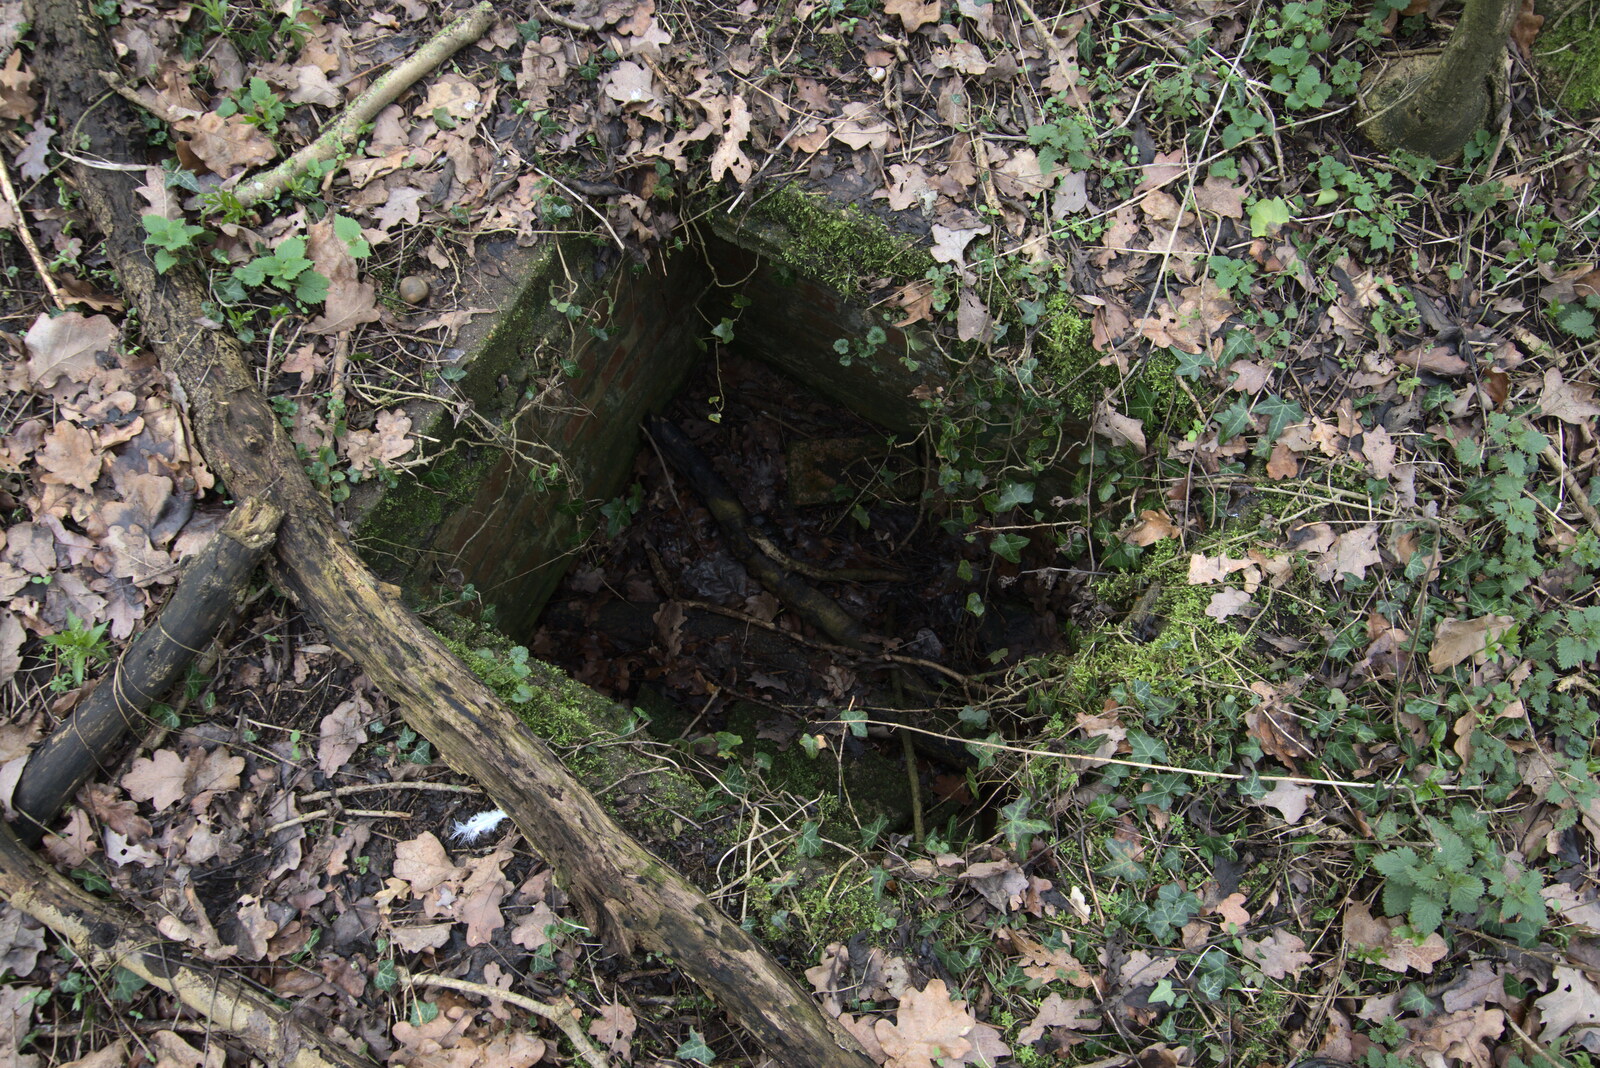 Some sort of manhole from The Old Sewage Works, The Avenue, Brome, Suffolk - 20th February 2021